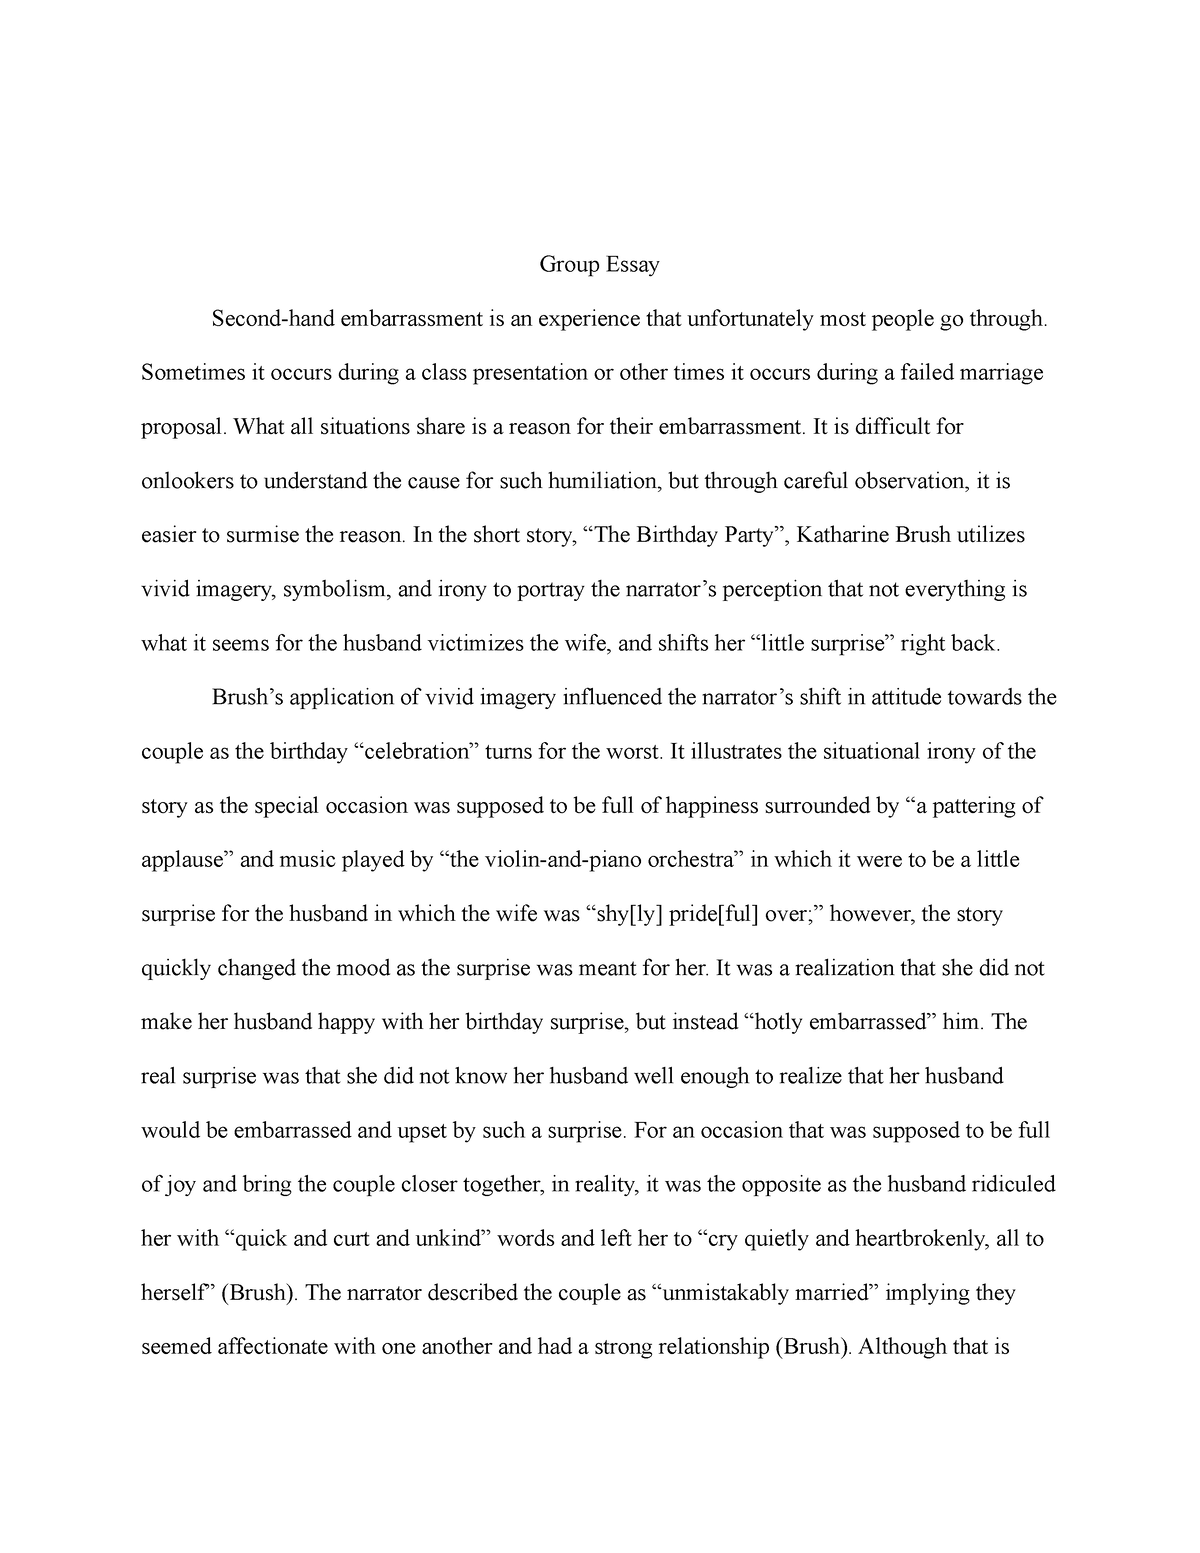 birthday-party-essay-group-draft-group-essay-second-hand